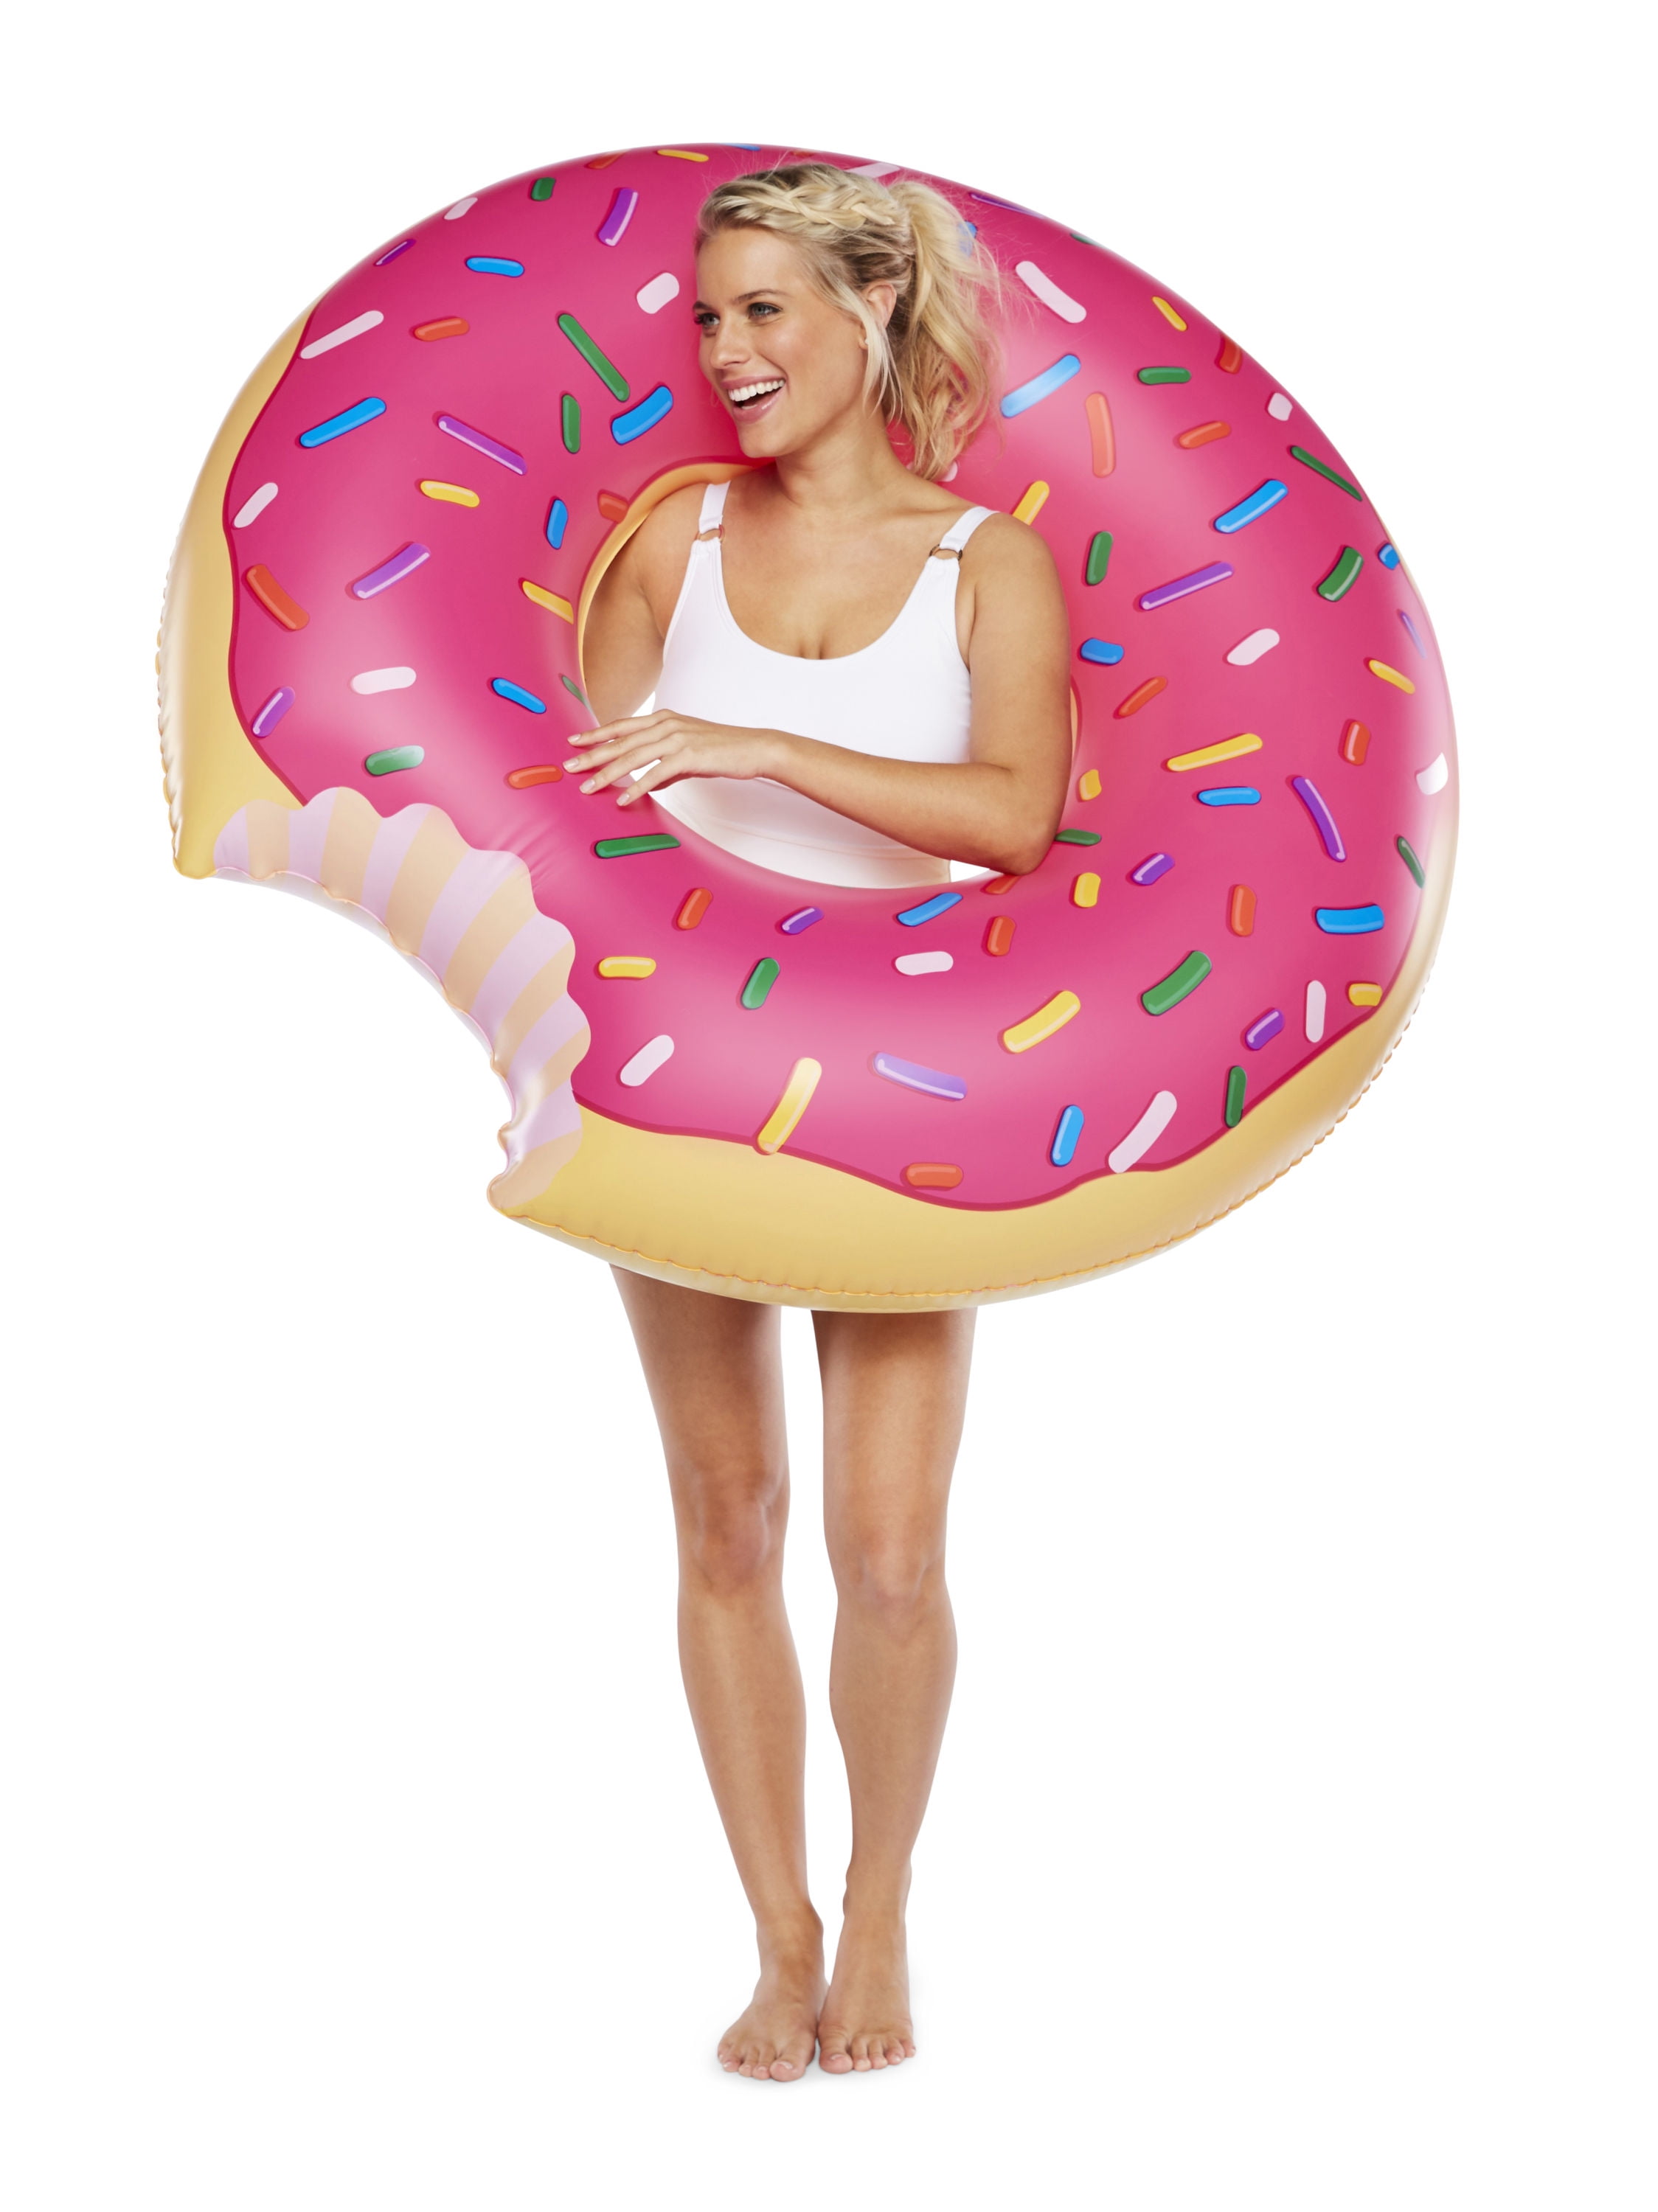 New Bigmouth Inc Pink Frosted Donut Inflatable Swimming Pool Float Tube 4 Foot 